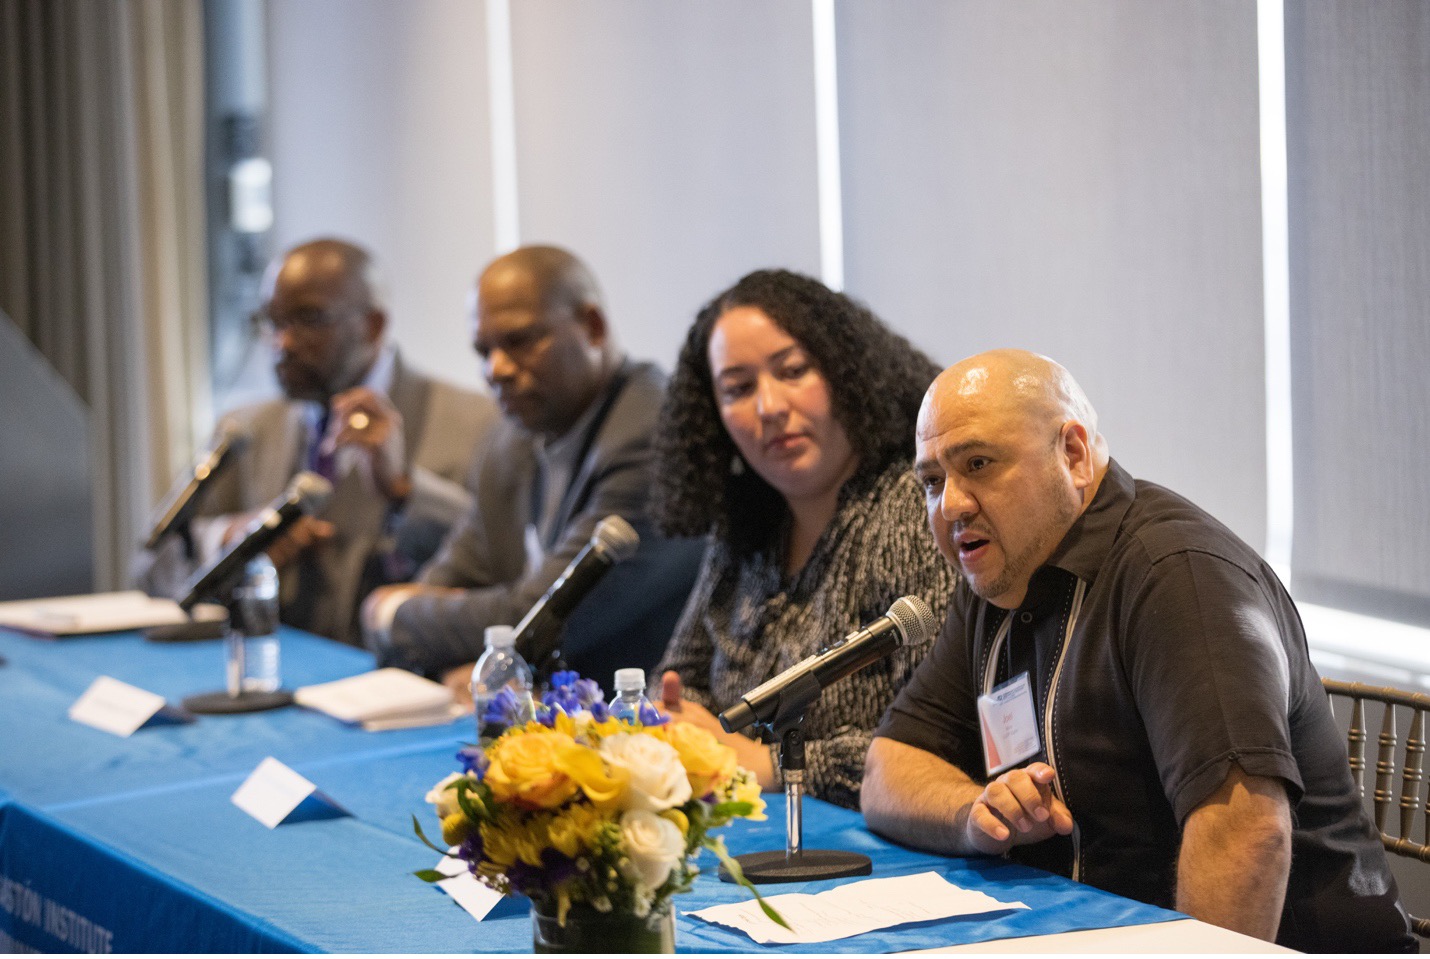 L to R: LLOP panel moderator Karl Bell, director of mentoring and academic achievement at Boston College, with panelists Carlos Maynard, Tariana Little, and Joel Mora.